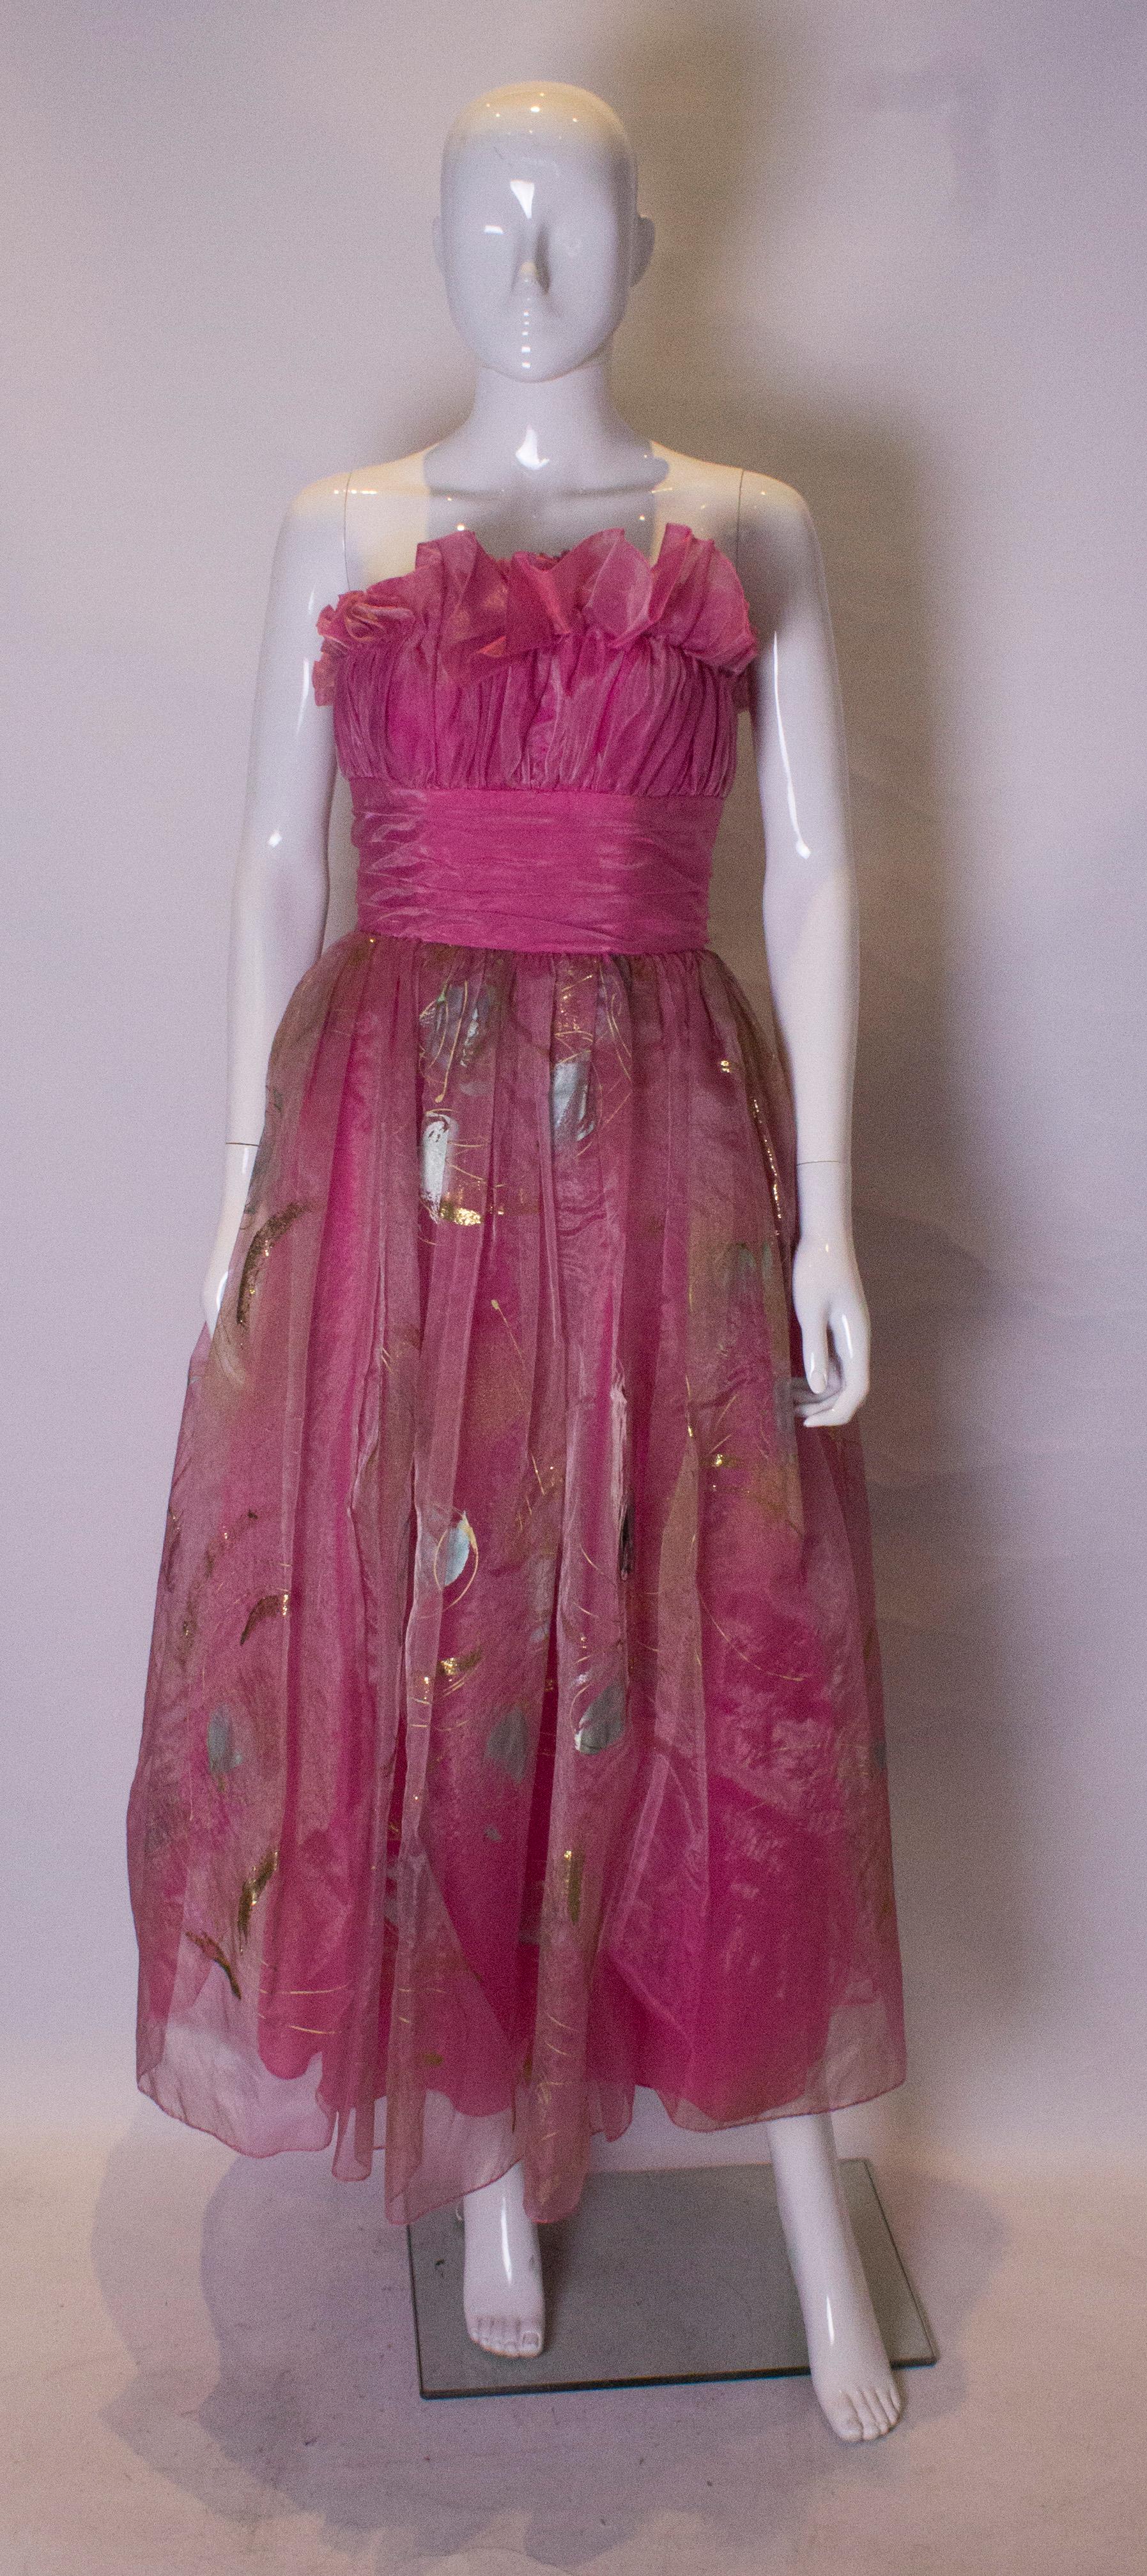 A stunning pink prom dress with a wonderful hand painted skirt.  The skirt is painted in an attractive print in gold , silver and  turquoise. The dress is fully lined and has a net underskirt.  It has a frill at the bust line and a central back zip.